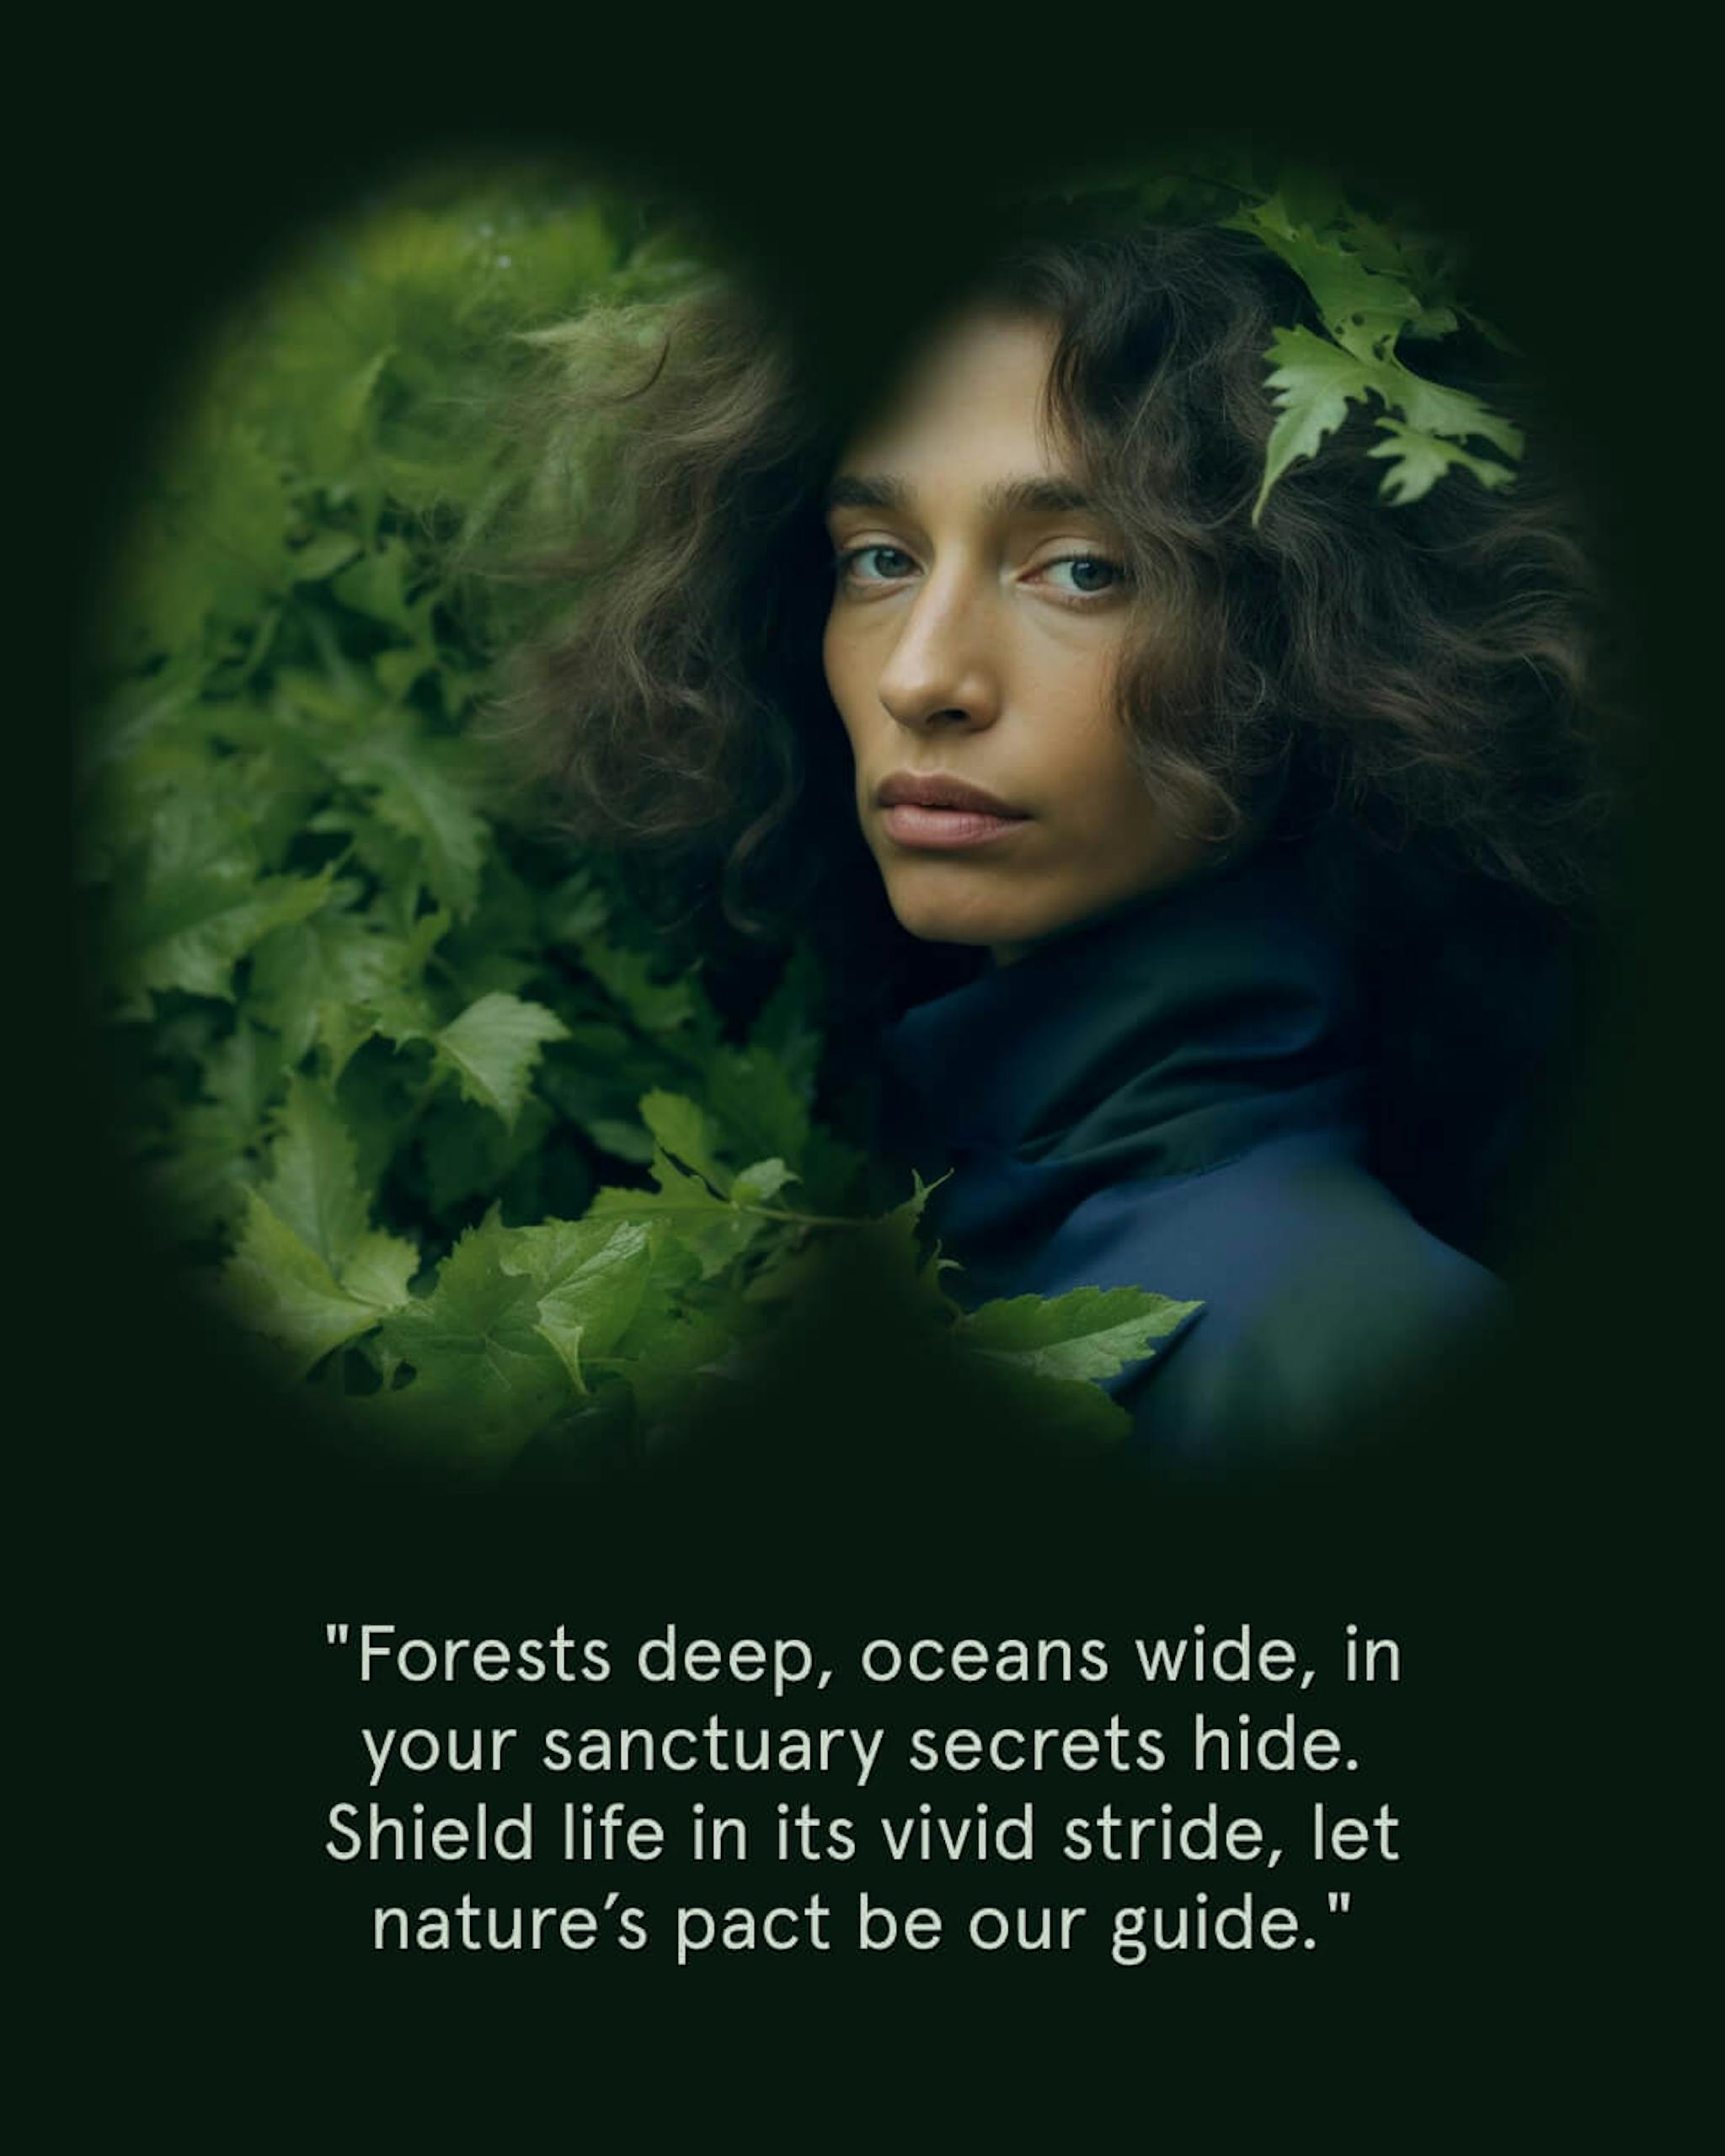 Person surrounded by lush greenery with a quote: "Forests deep, oceans wide, in your sanctuary secrets hide. Shield life in its vivid stride, let nature’s pact be our guide."